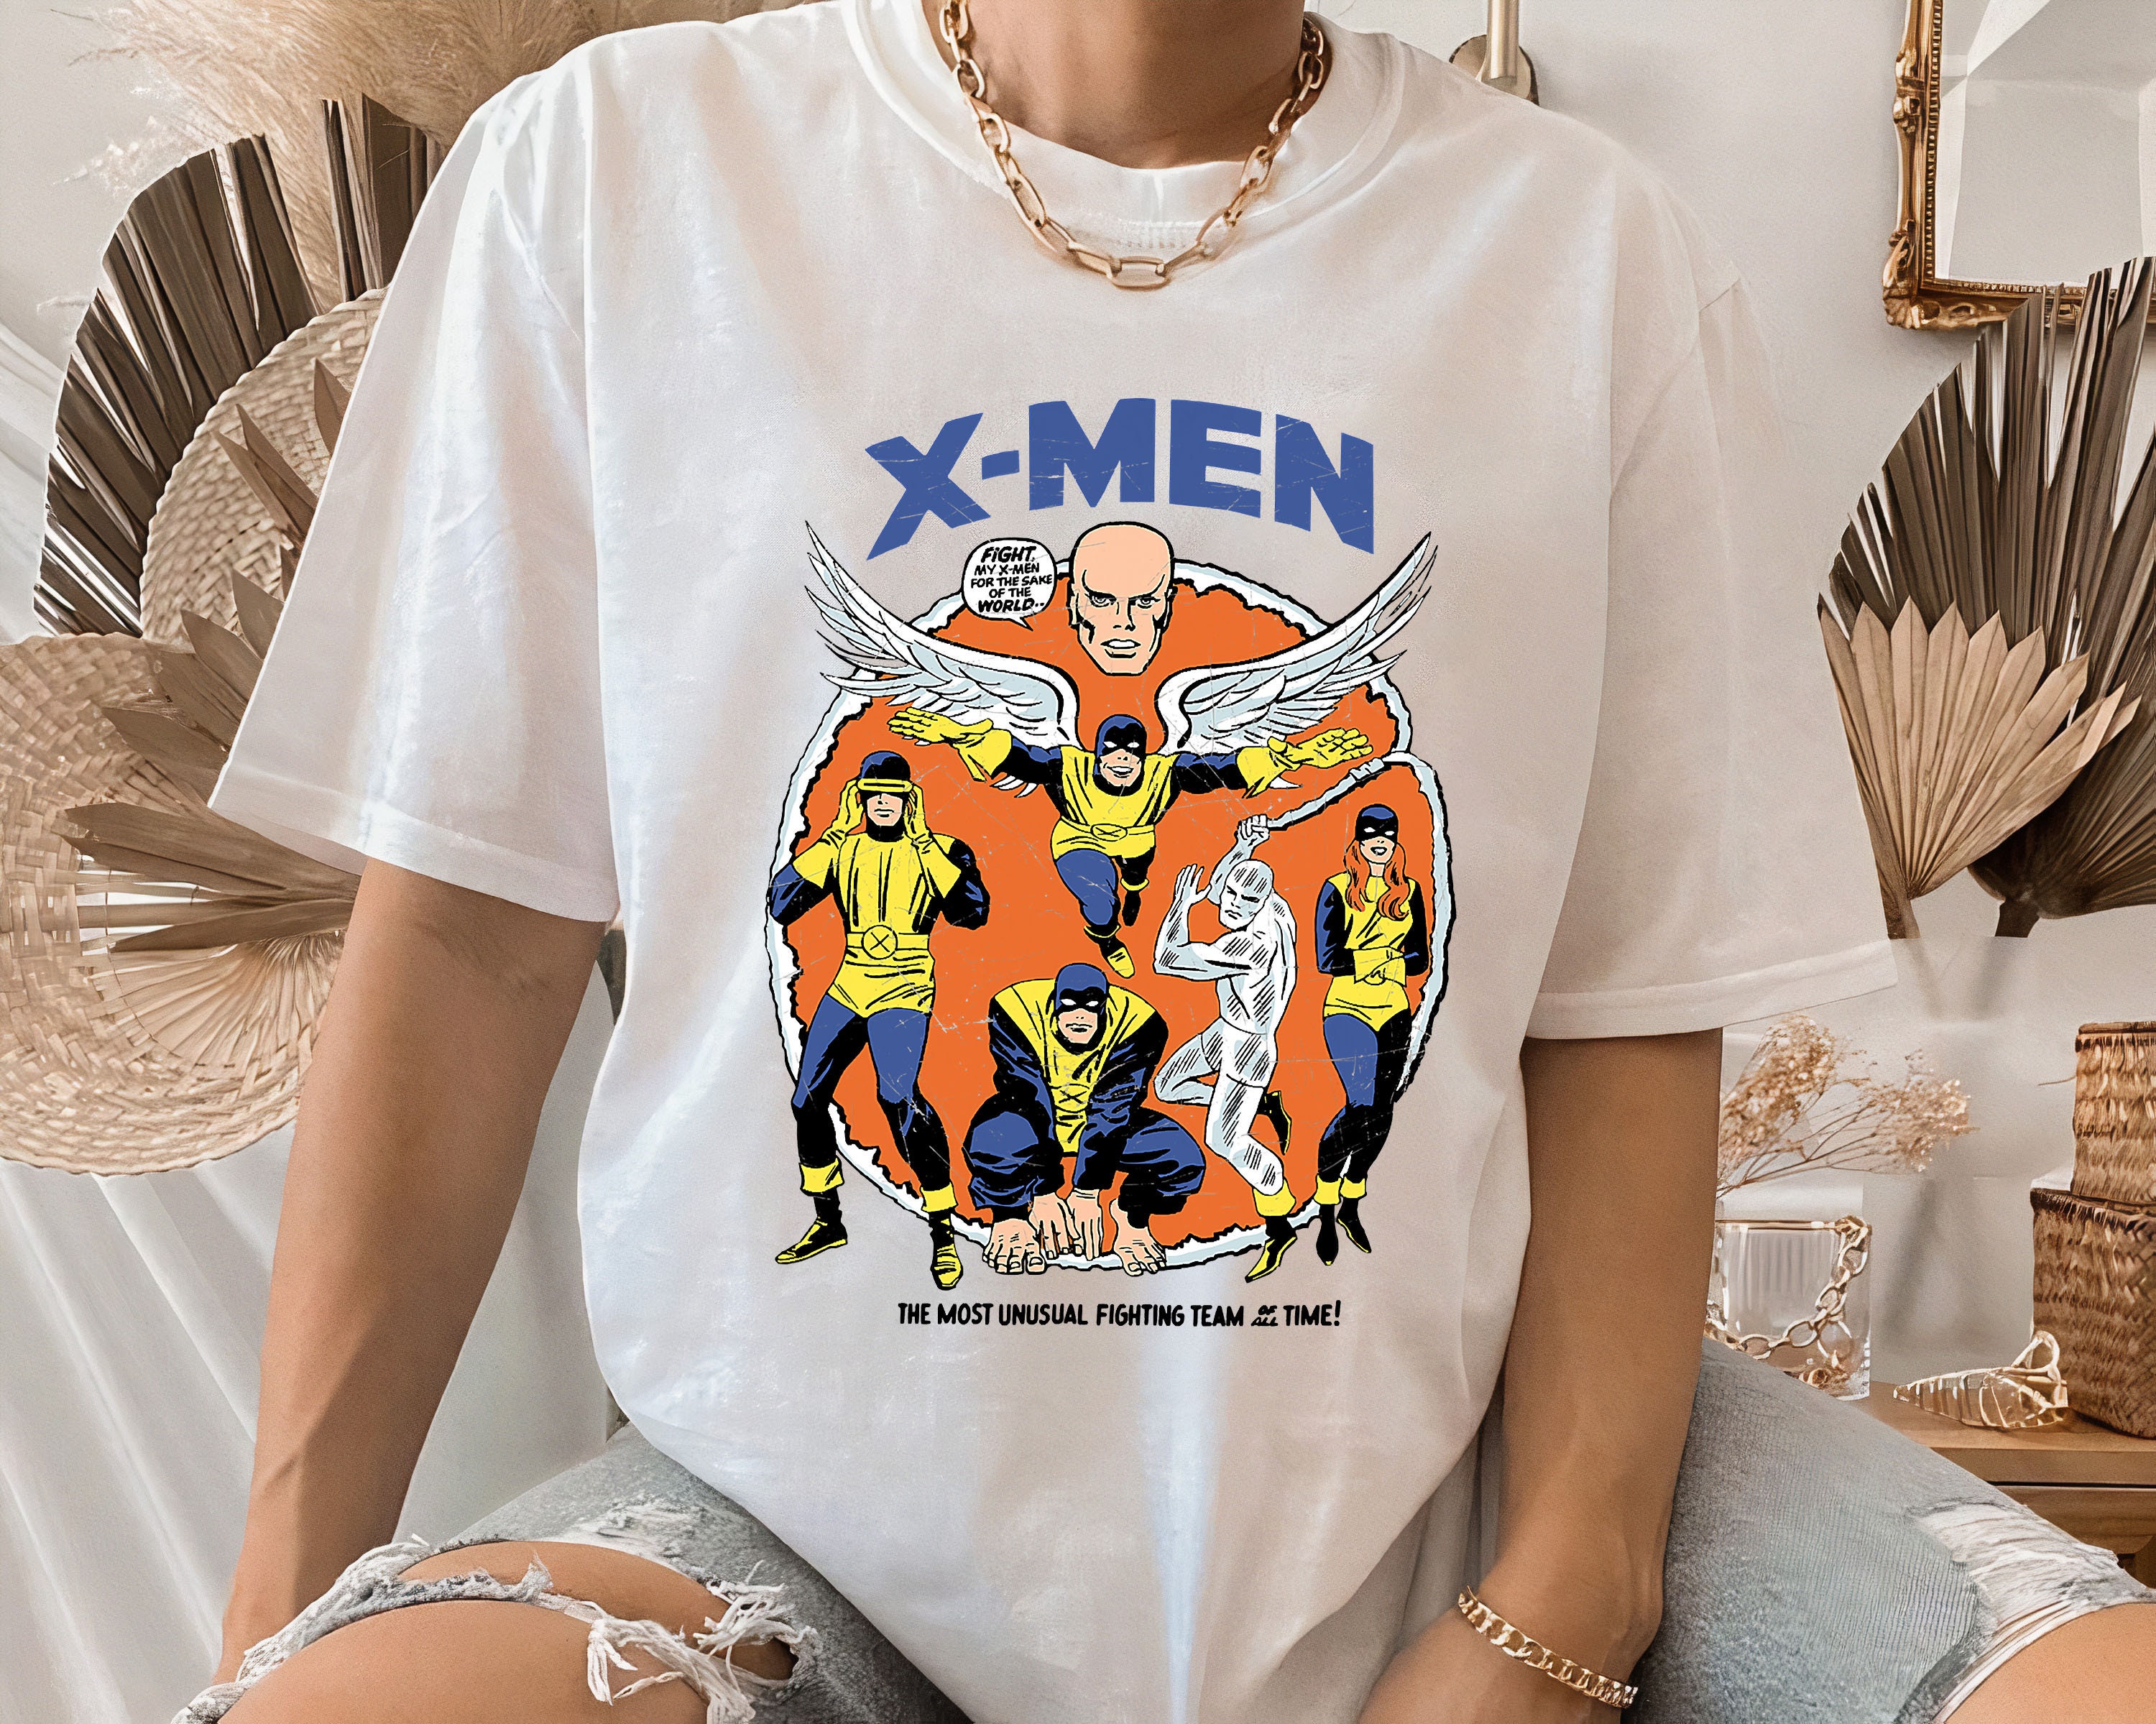 Comic Shirts Online In India - Etsy